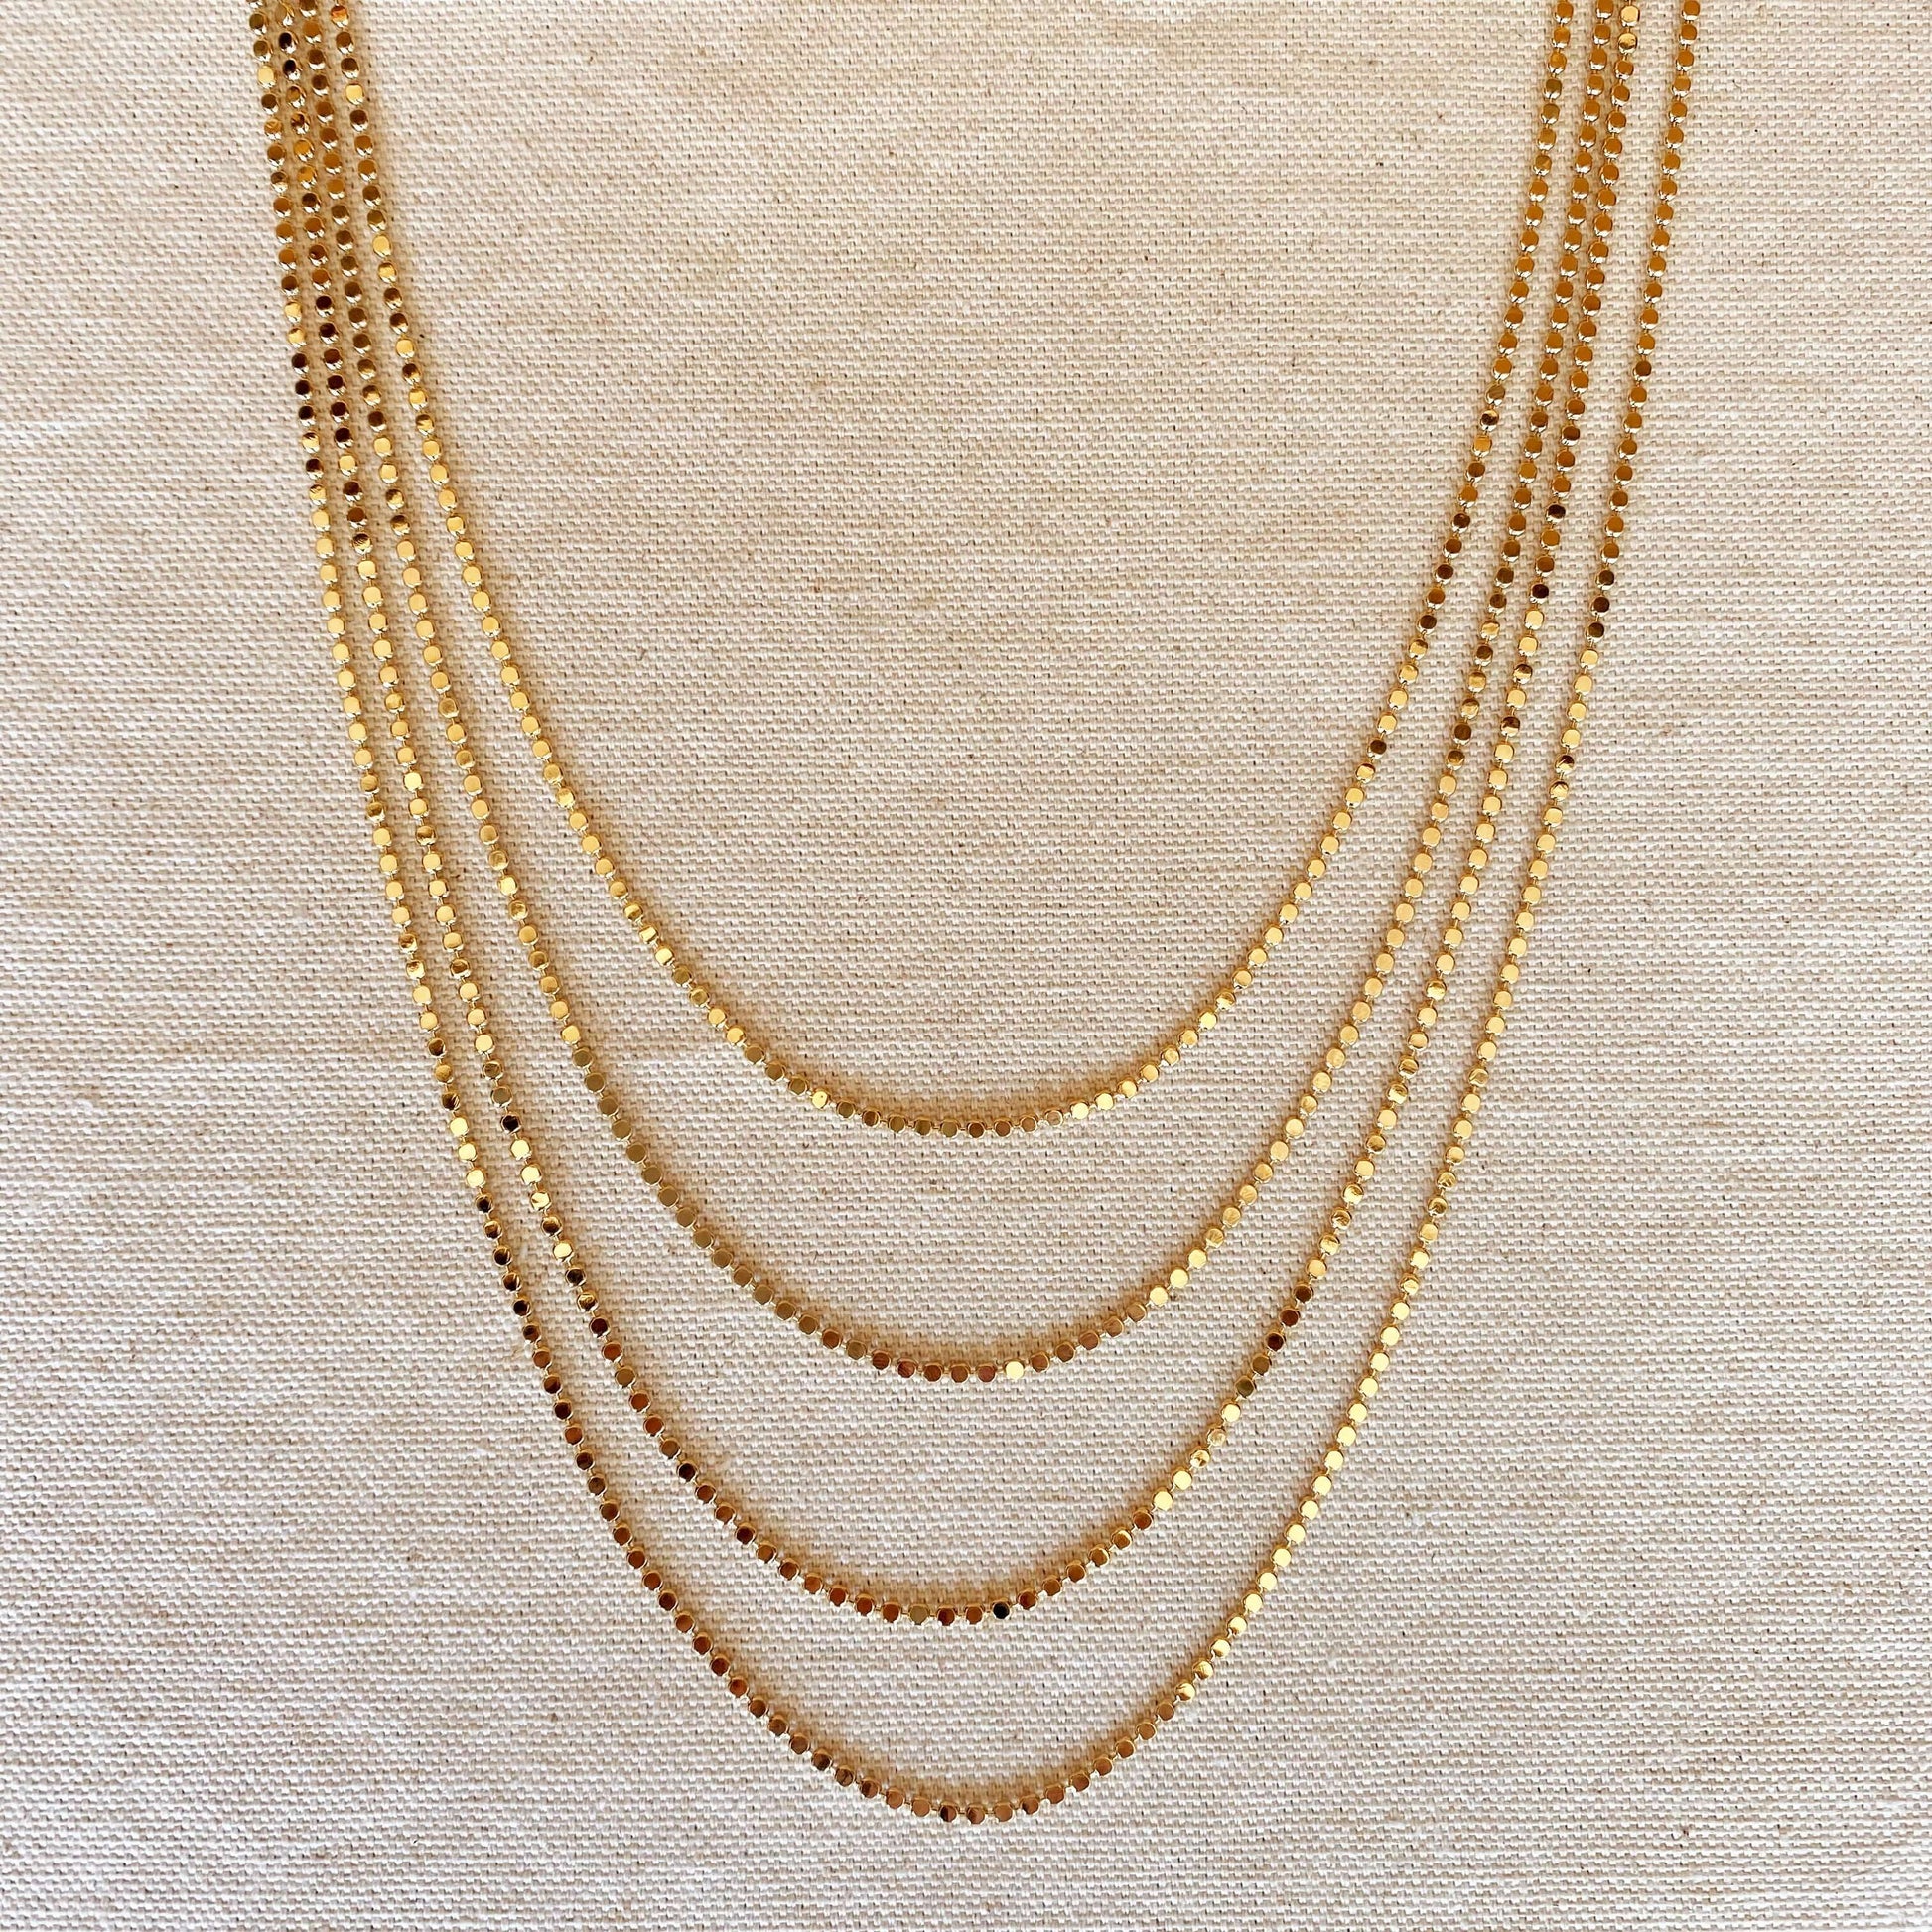 GoldFi 18k Gold Filled 2mm Flat Ball Chain Necklace